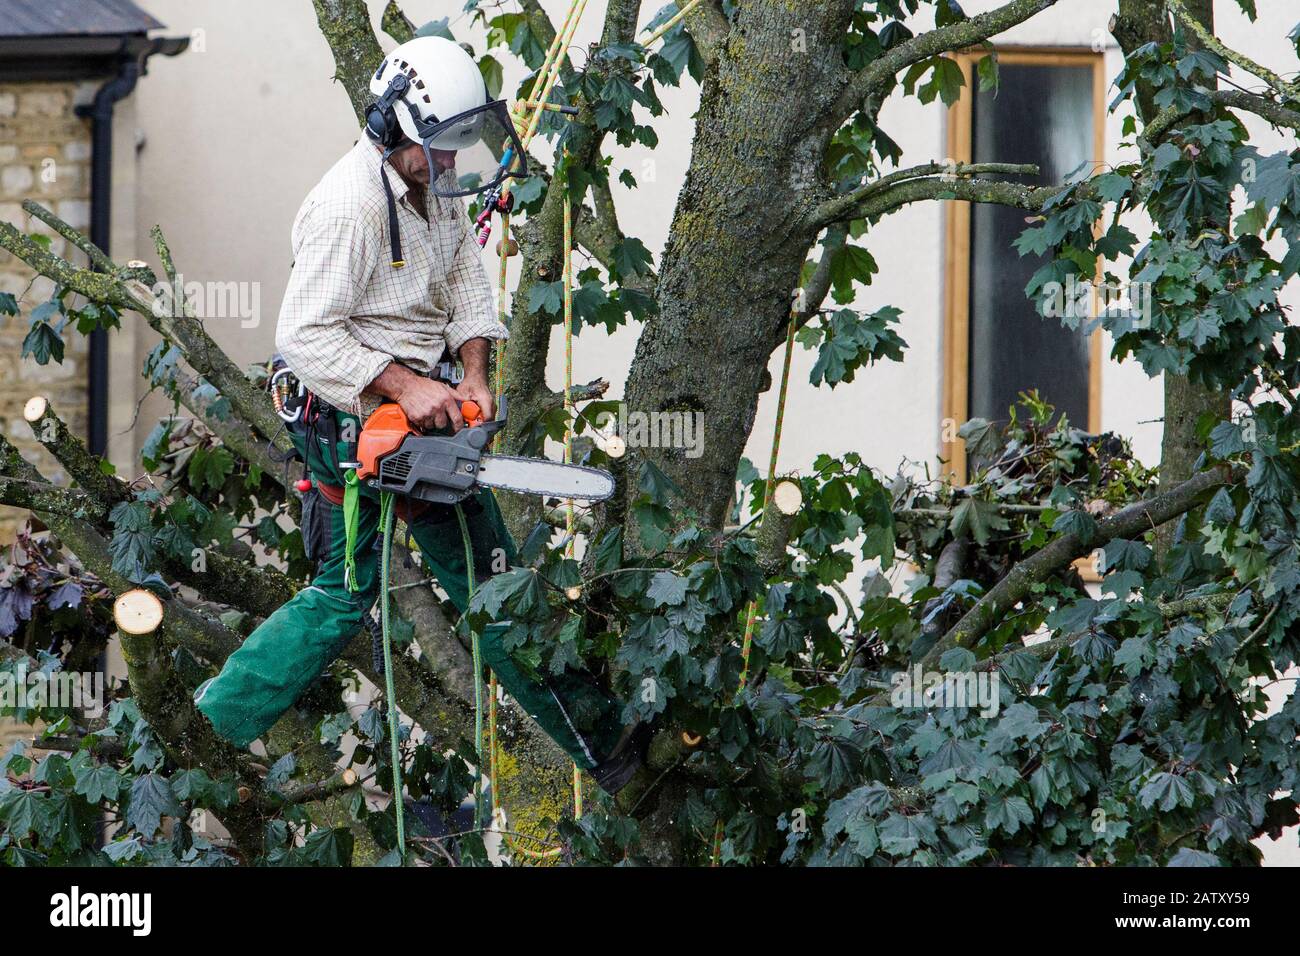 A tree surgeon arborist arboriculturist is pictured using a chainsaw as he cuts down a tree in Chippenham, Wilts. Stock Photo